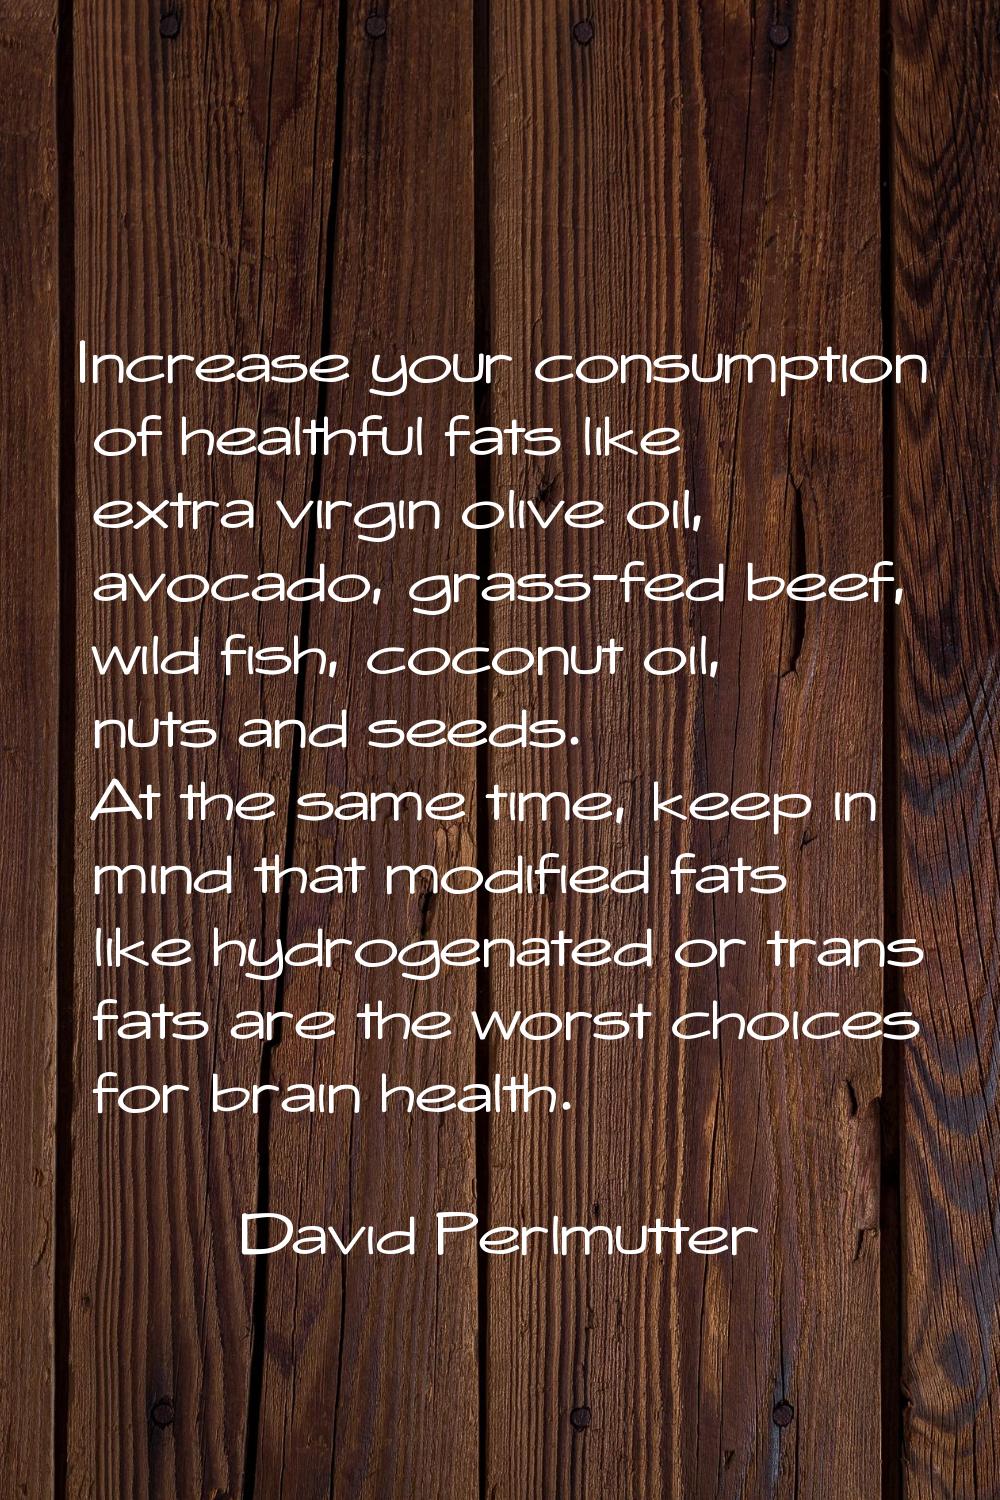 Increase your consumption of healthful fats like extra virgin olive oil, avocado, grass-fed beef, w